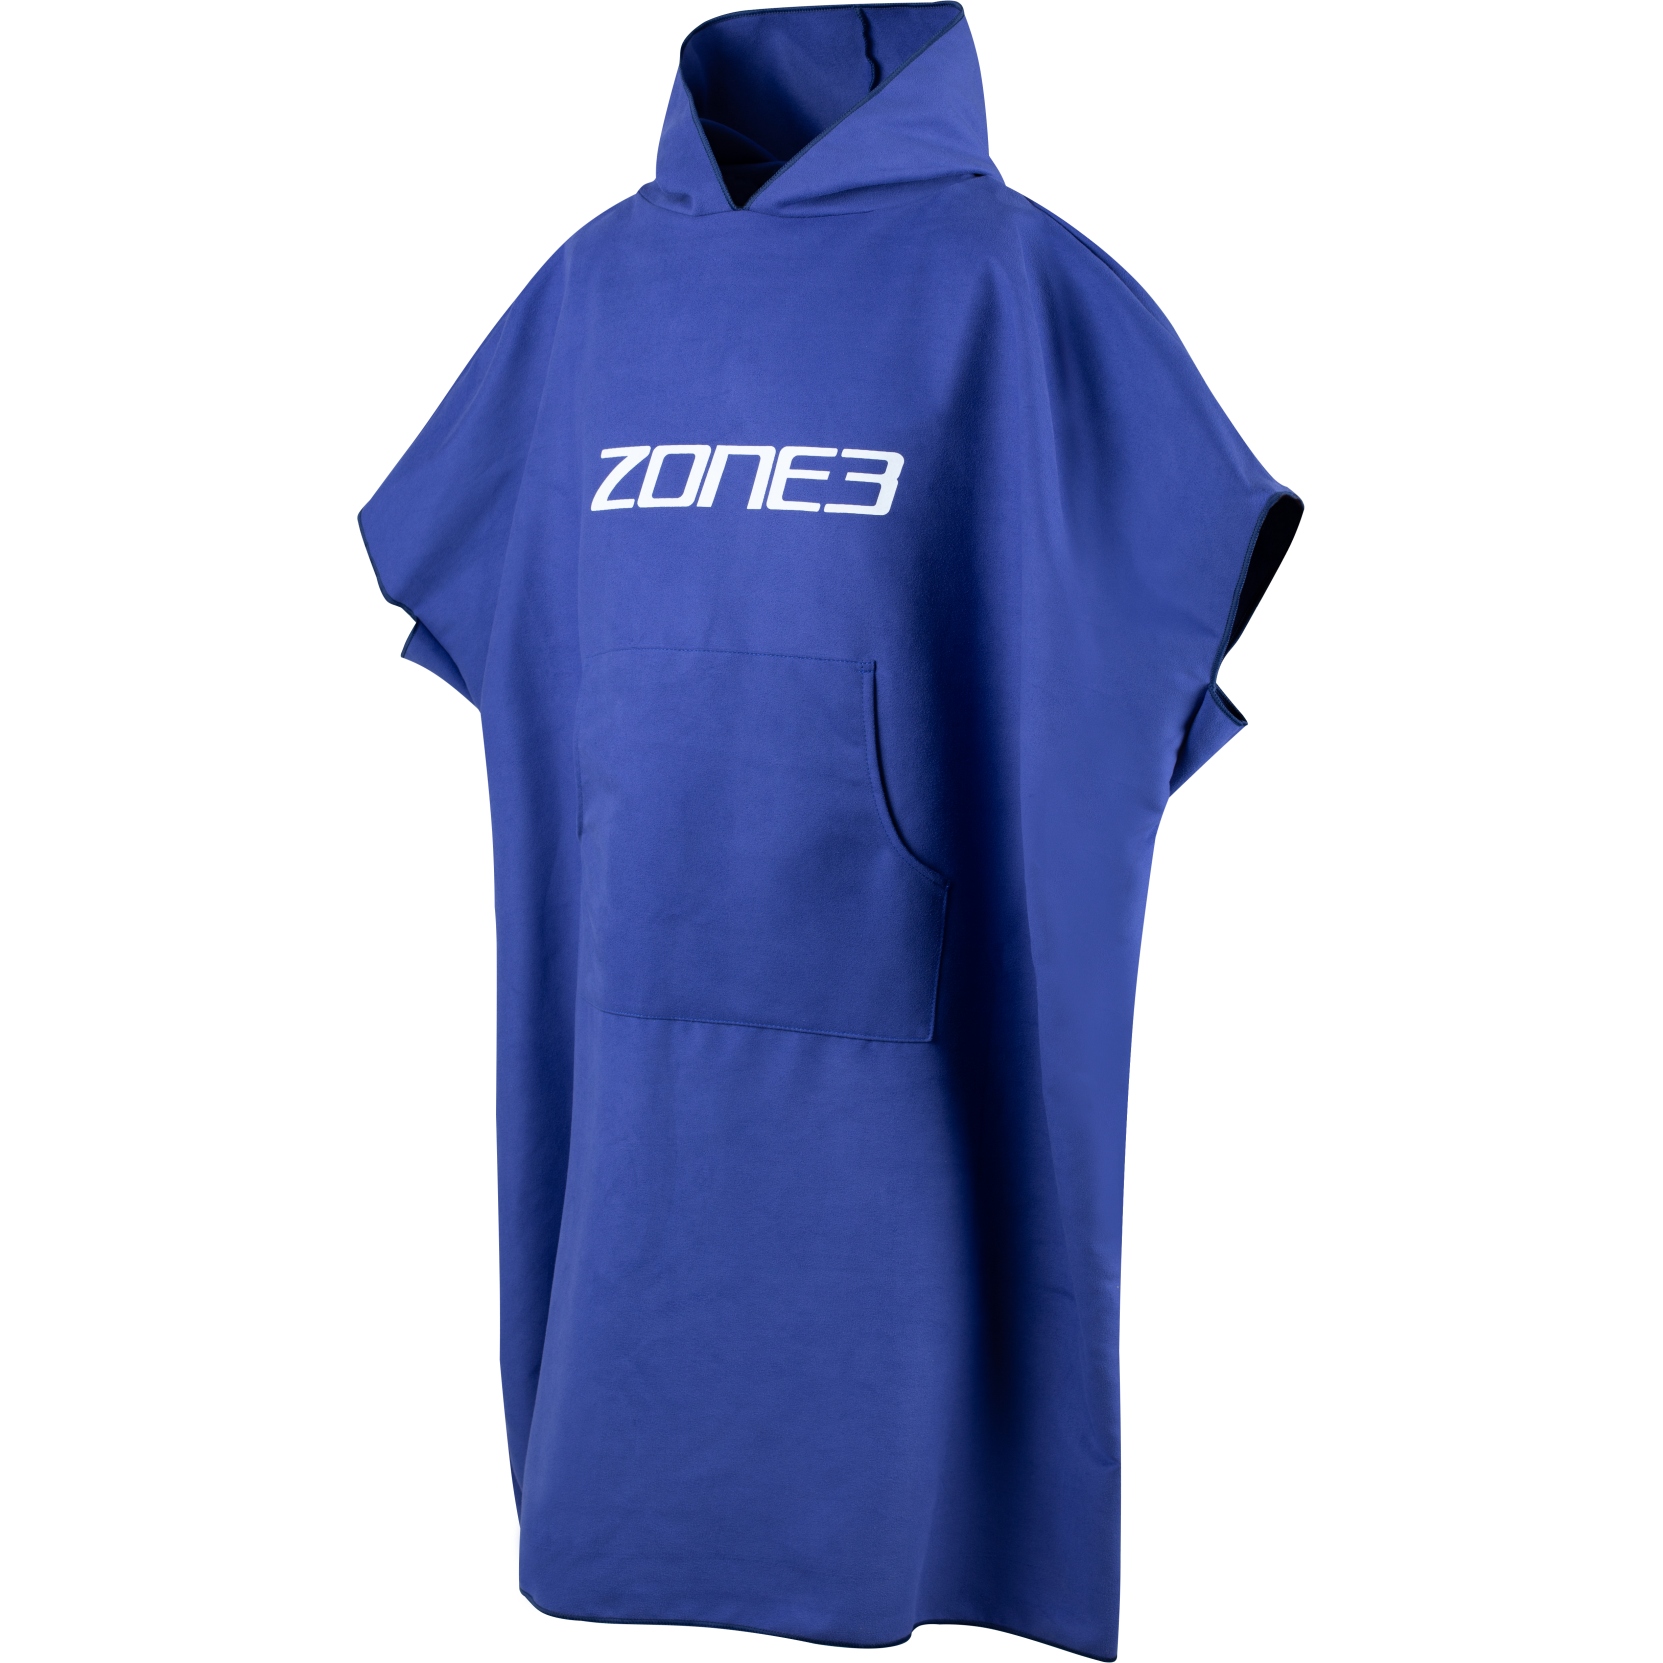 Picture of Zone3 Microfibre Poncho - navy